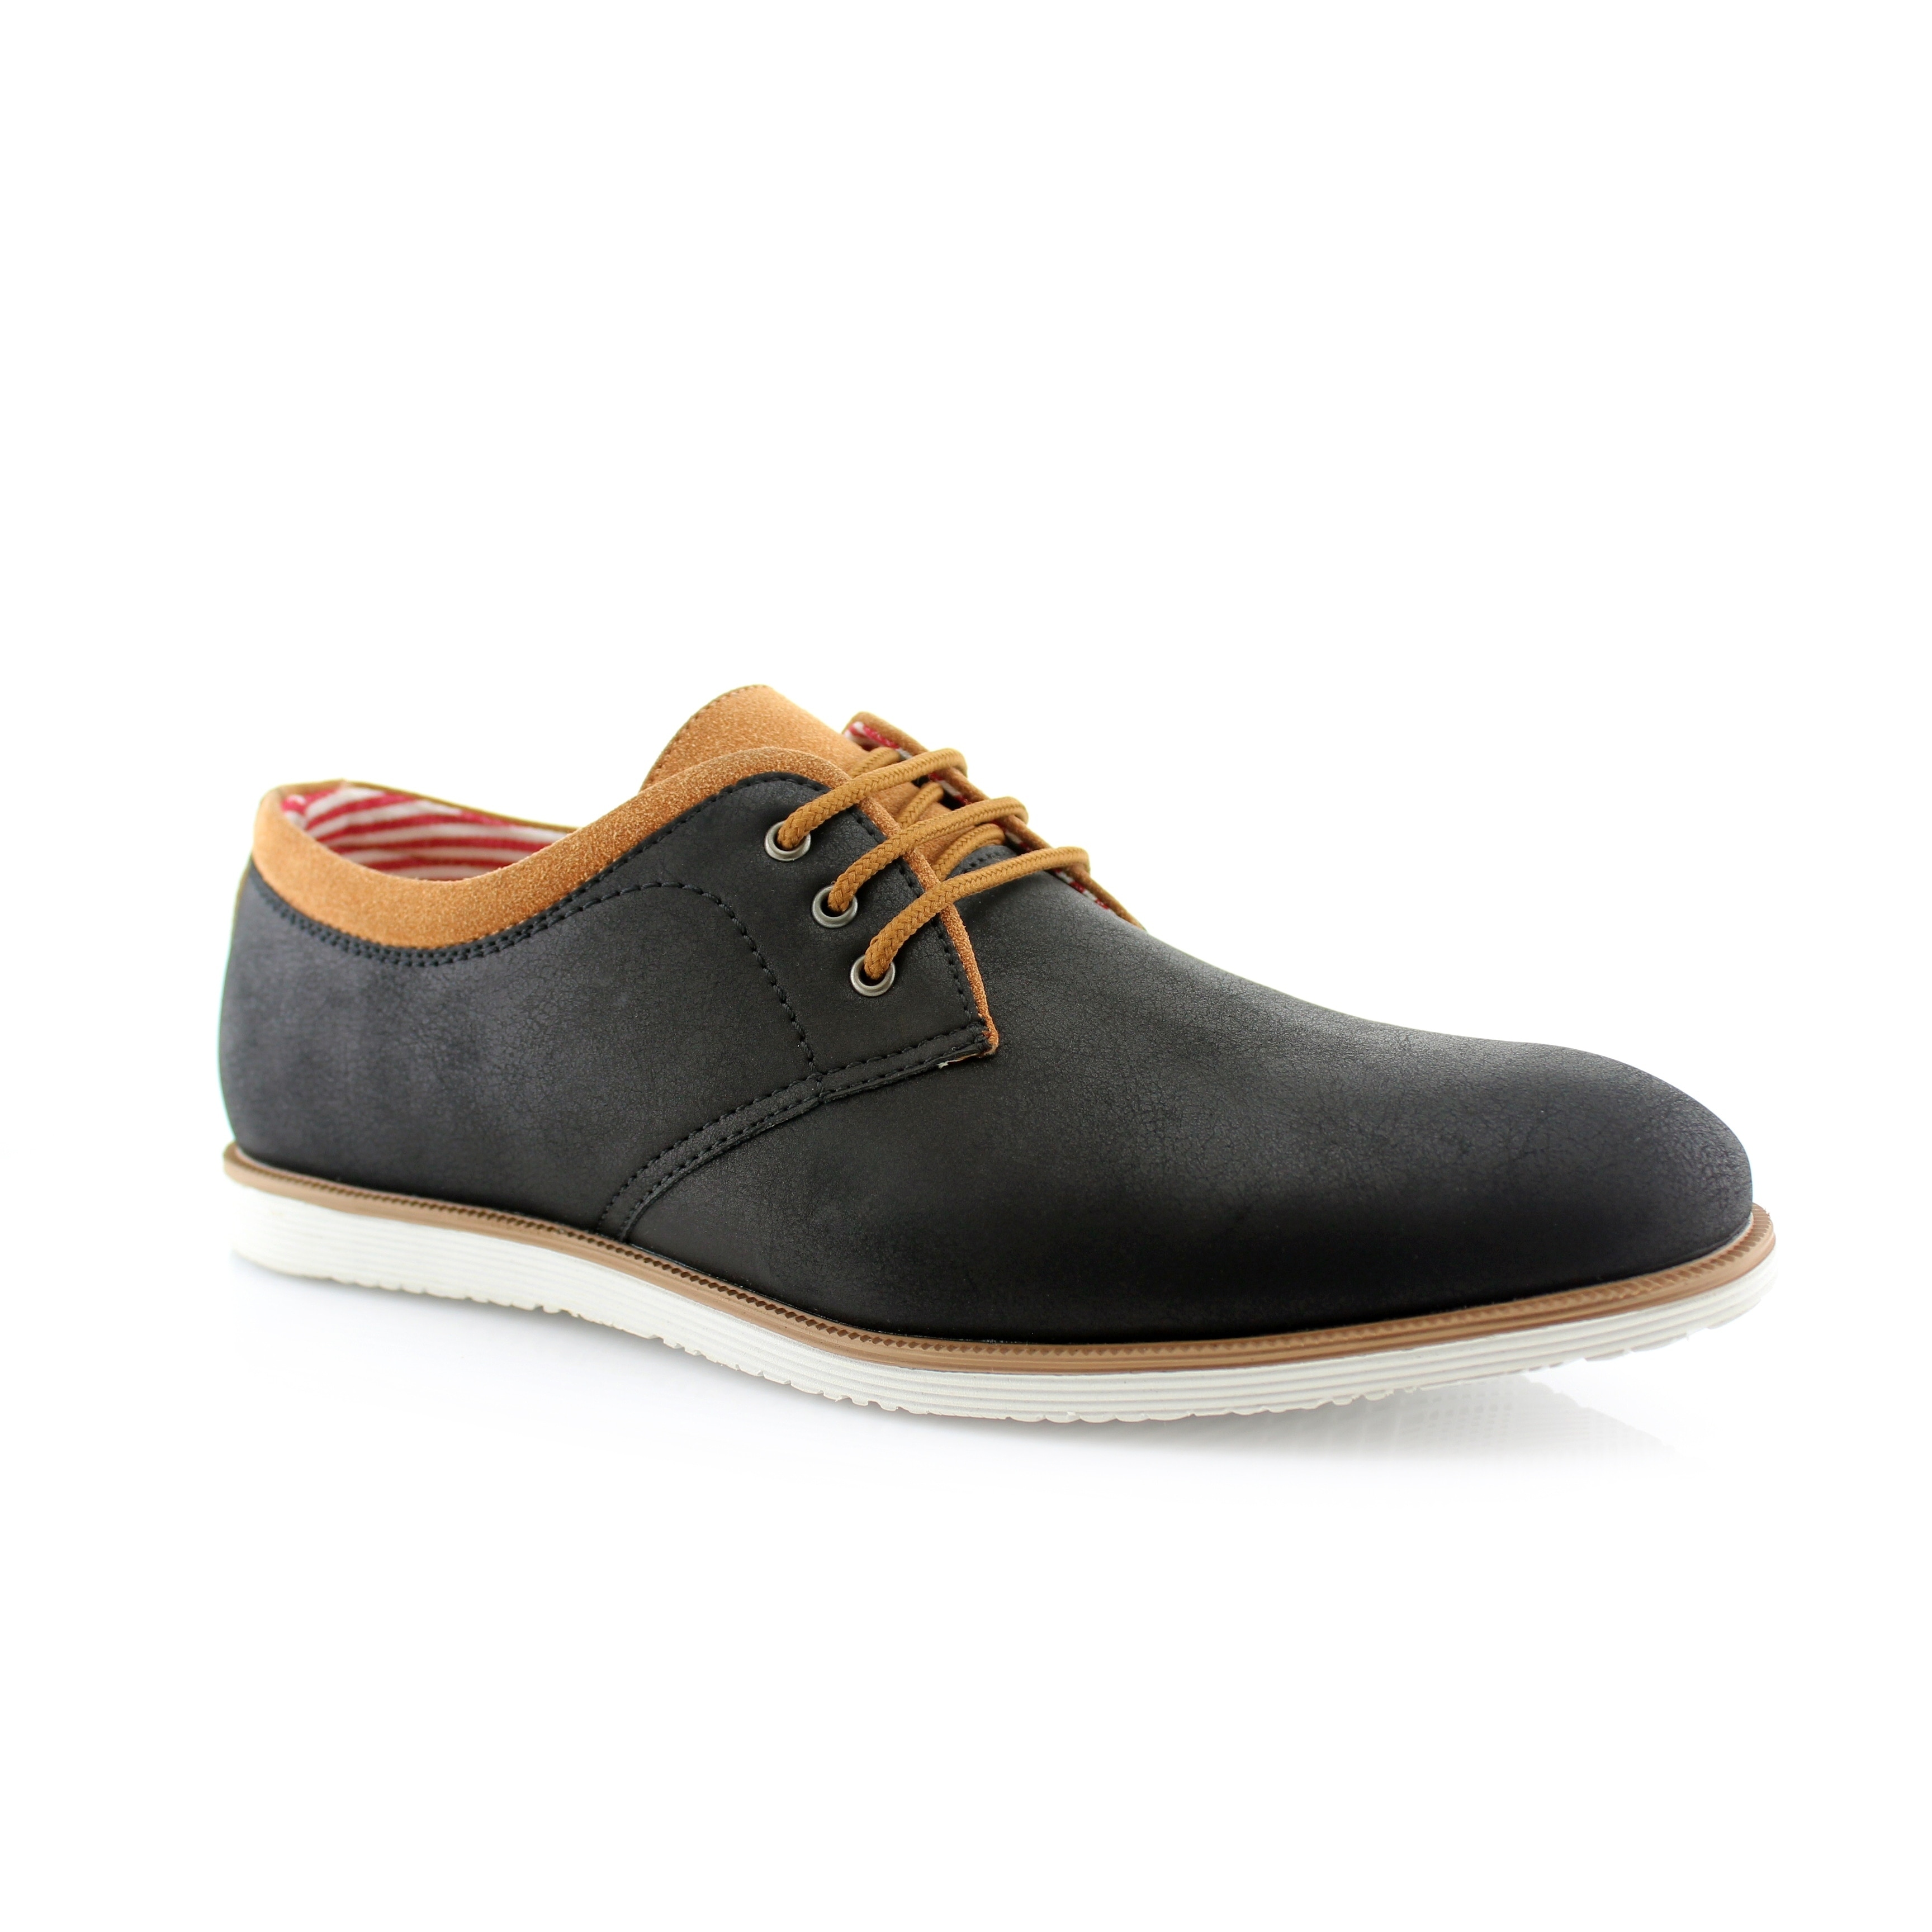 men's shoes for everyday wear